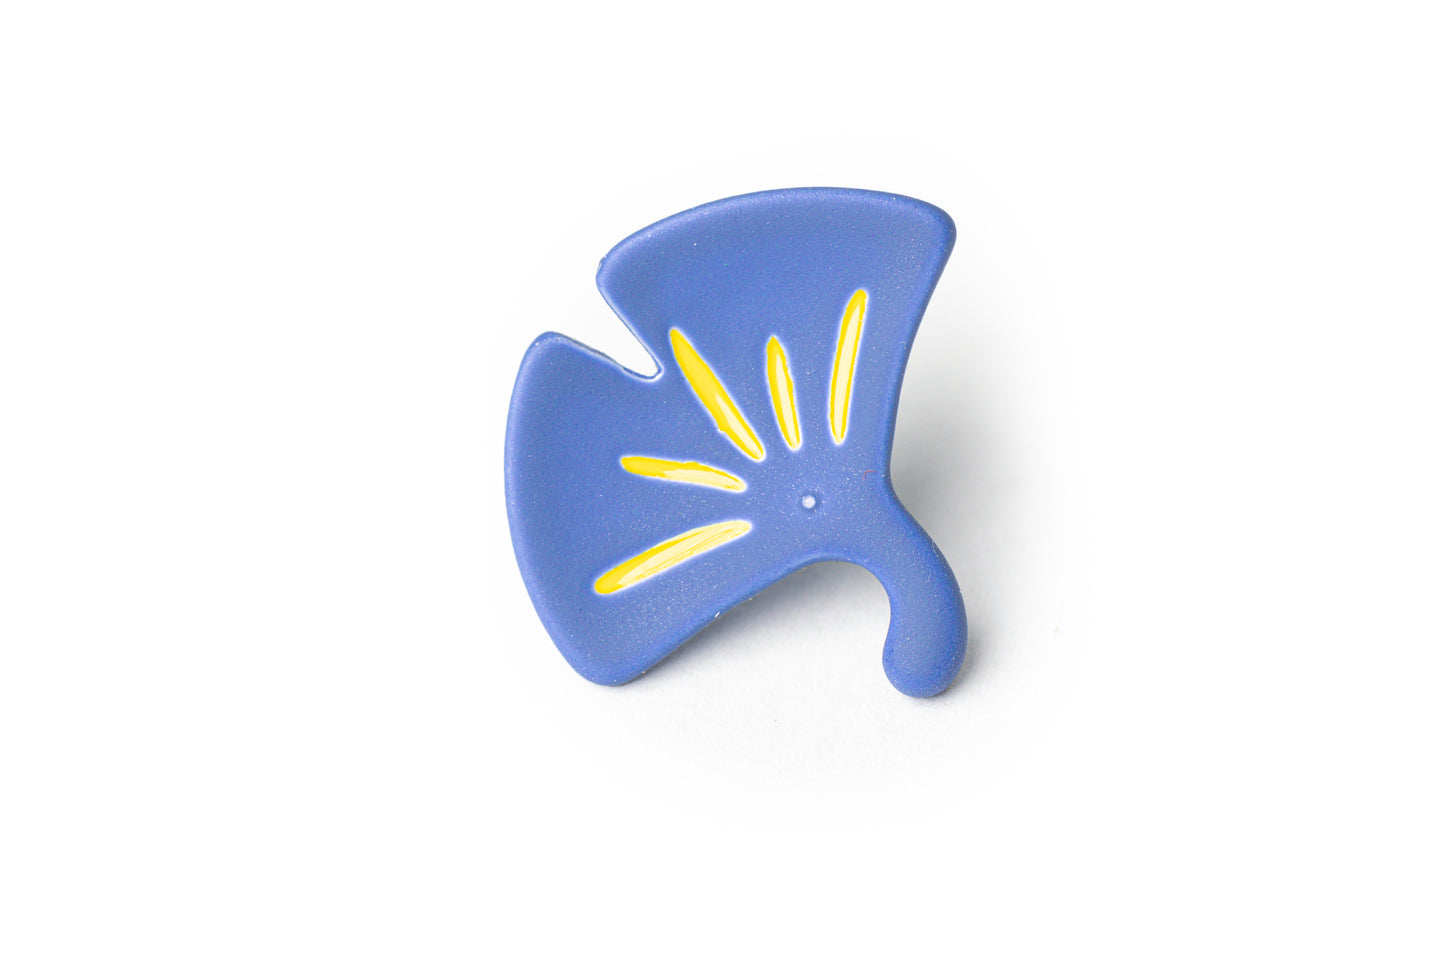 Japanese Fan Shaped Studs - Blue and yellow Studs for Women